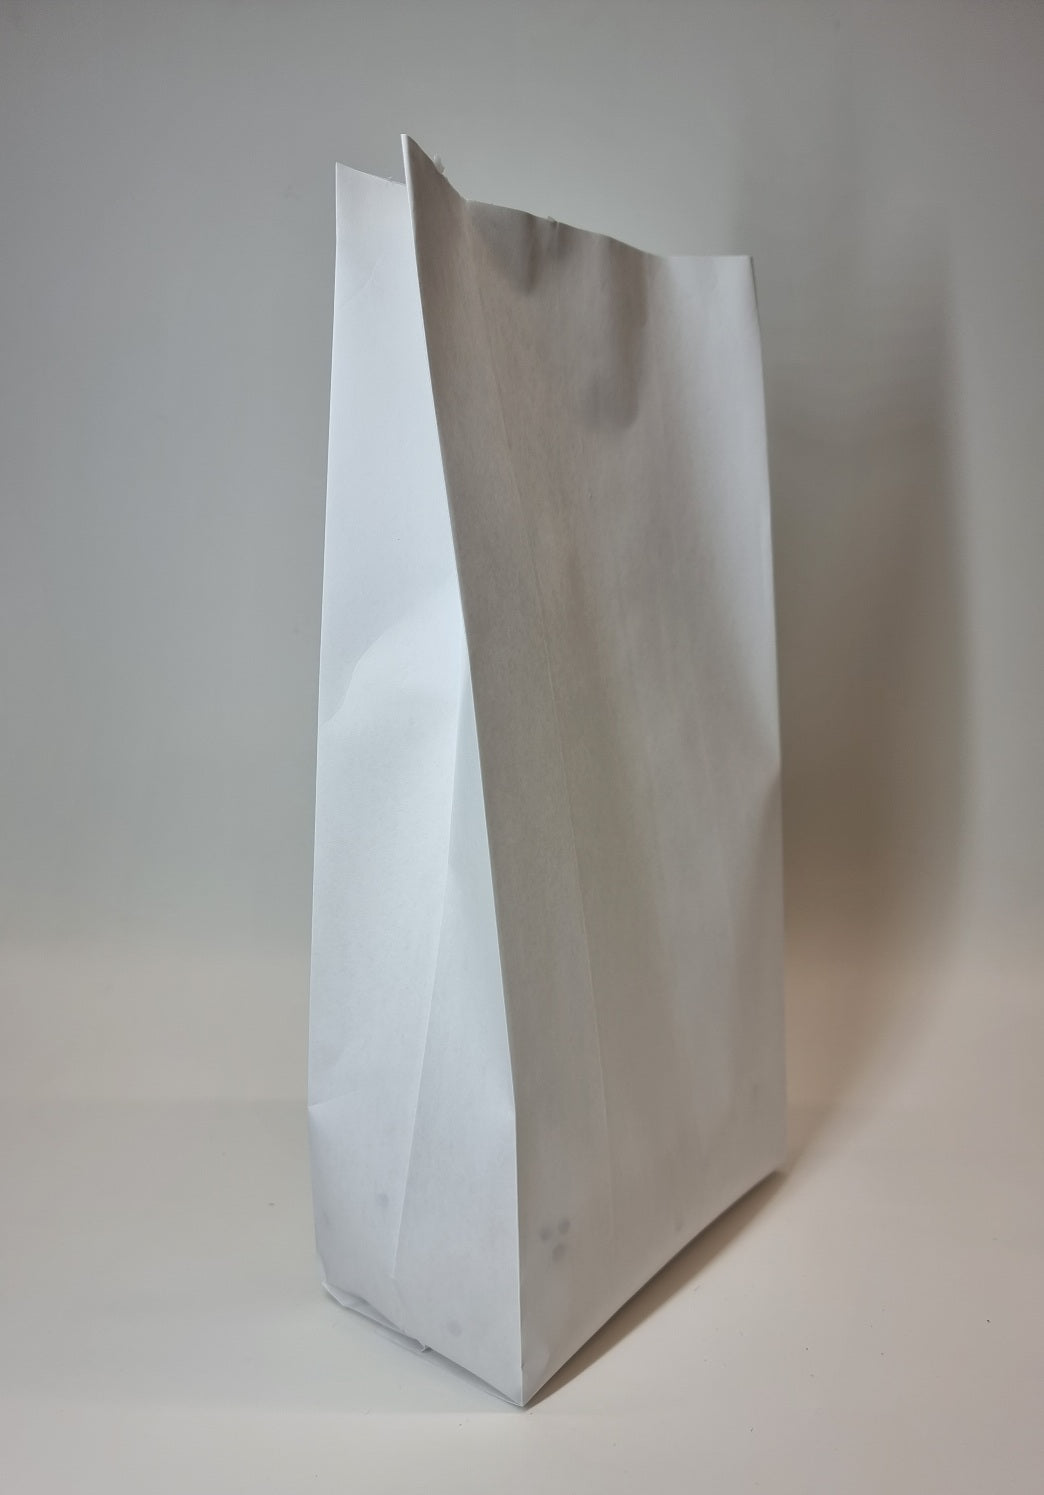 EmberPack™ Dry Goods 1kg Recyclable Paper Bag: 500 Bags (Wholesale) Packing Materials EmberPack by EAM 